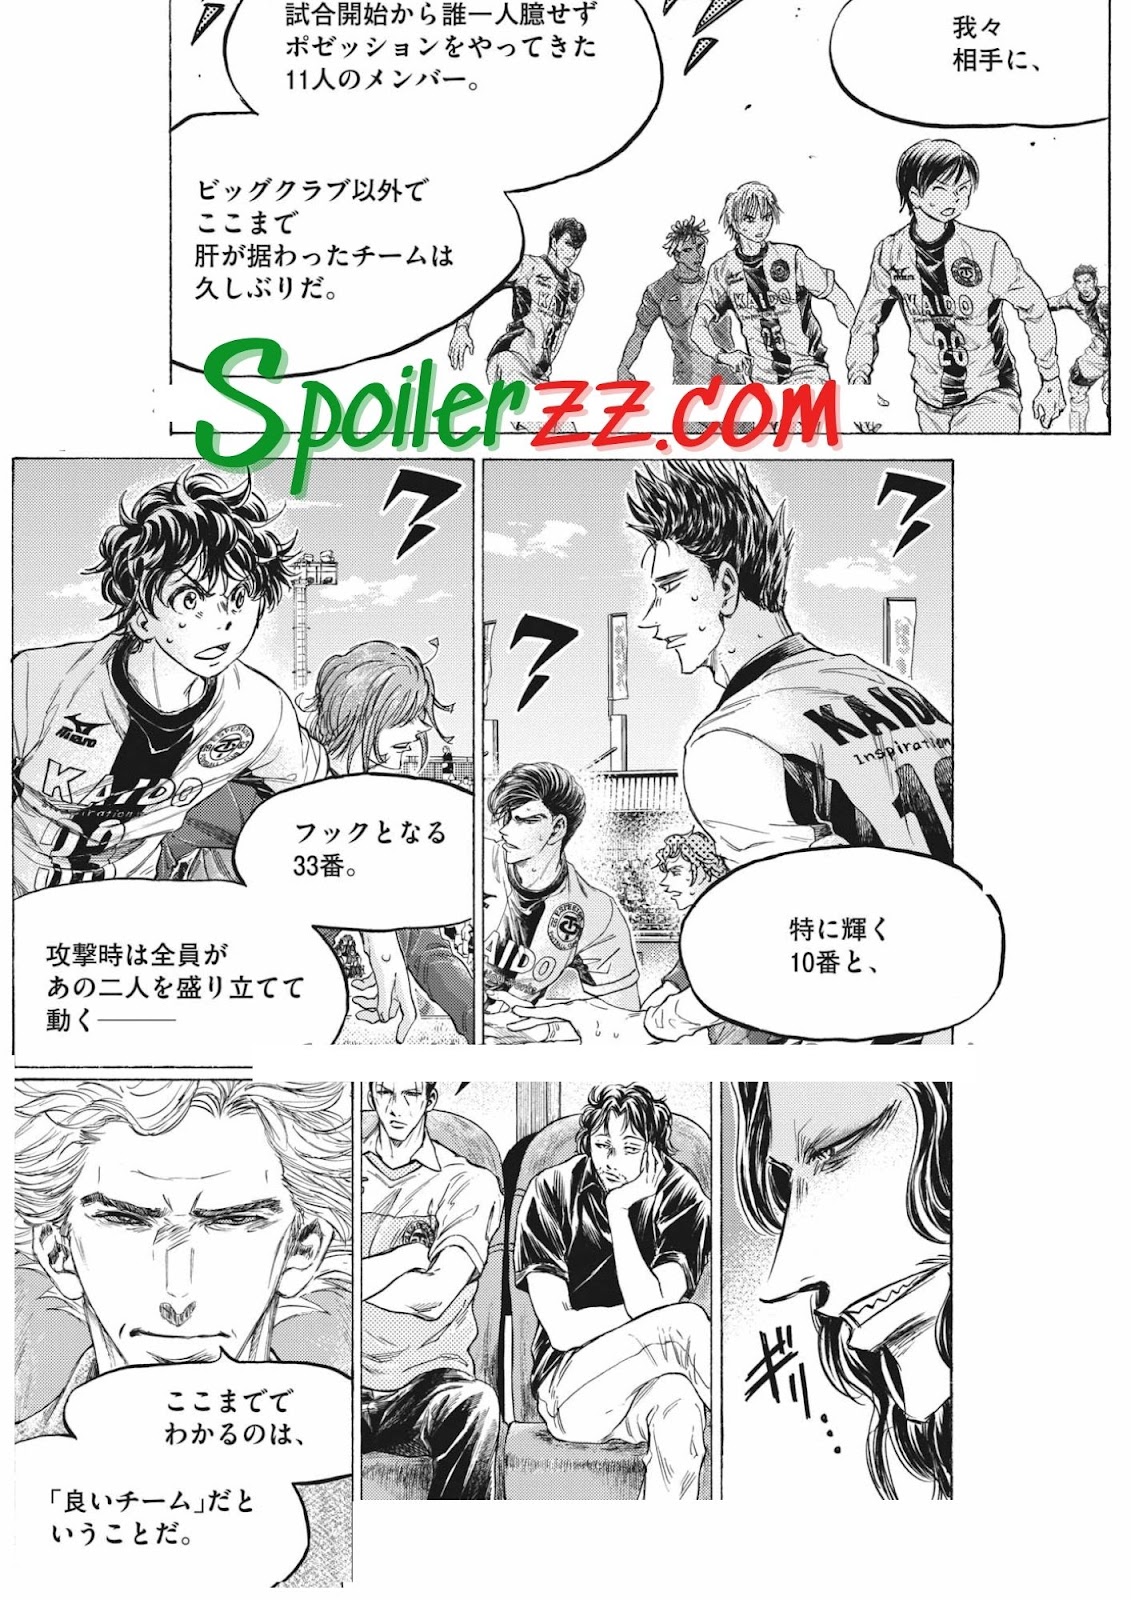 Ao Ashi chapter 352 release date, time, spoilers, where to read online -  The SportsGrail